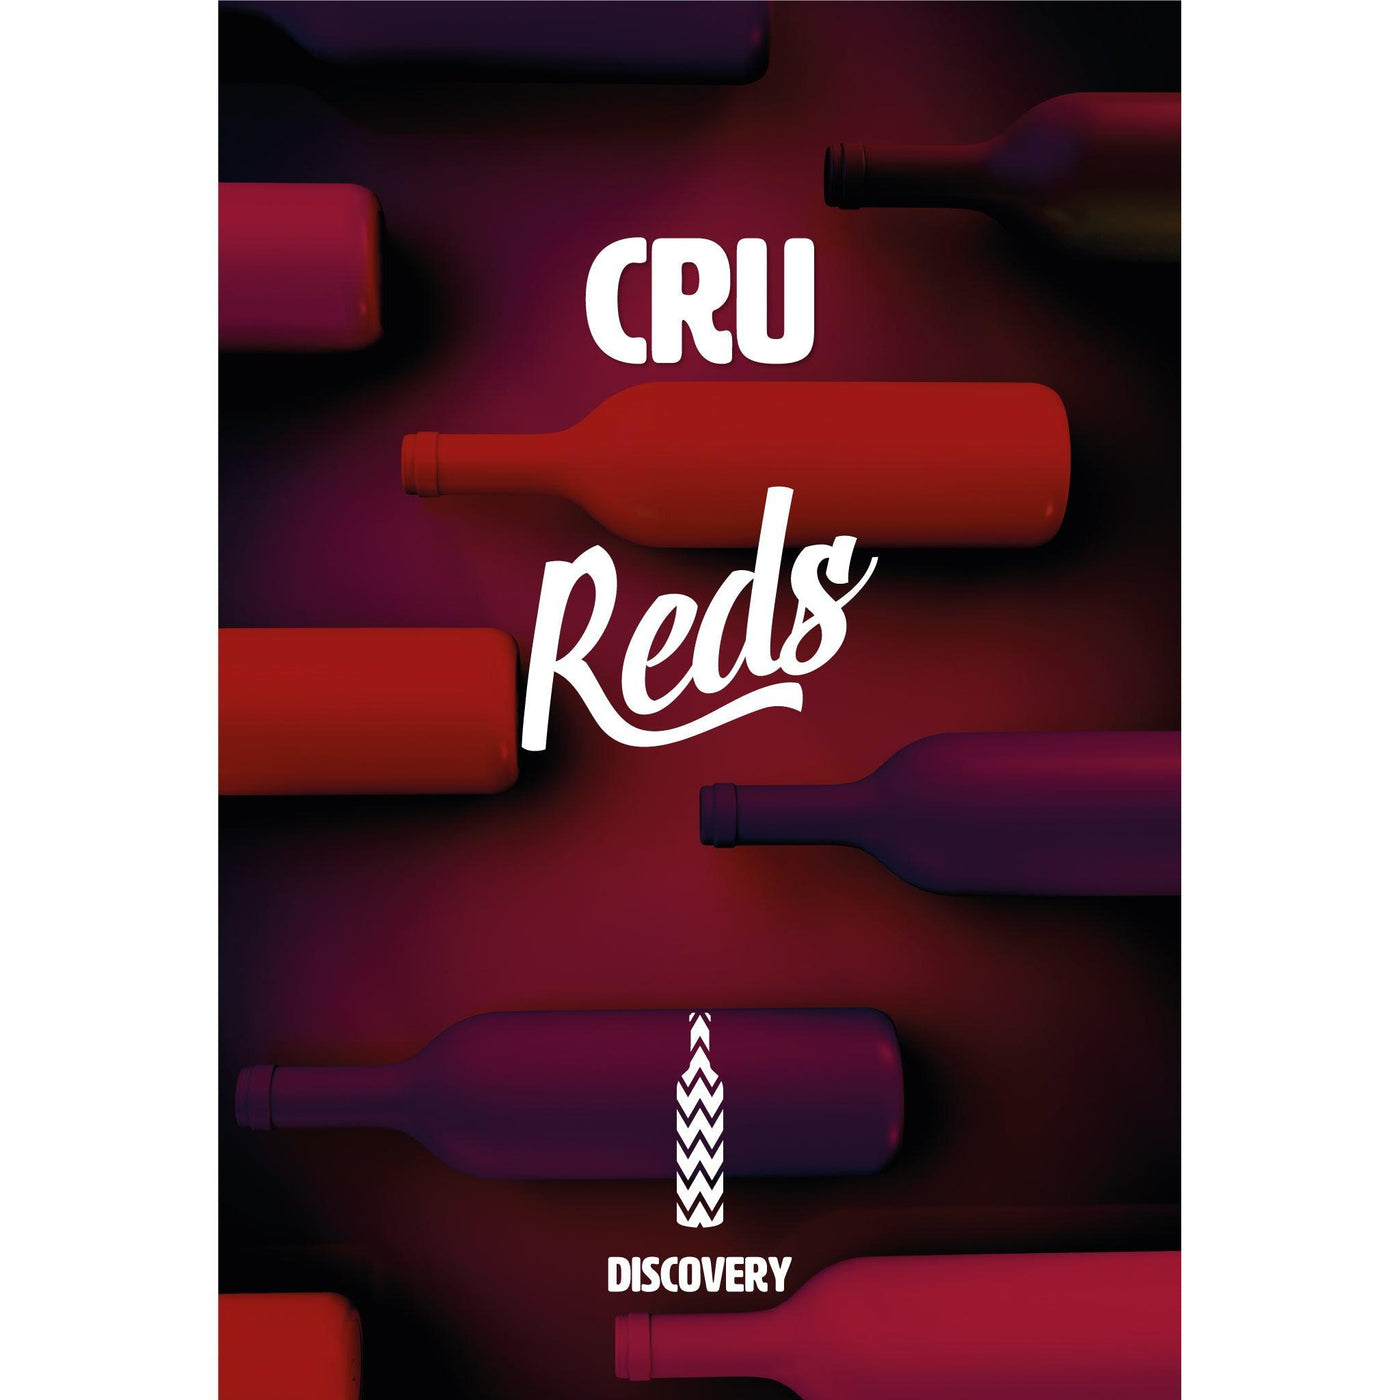 Discovery Cru Reds 3 Months